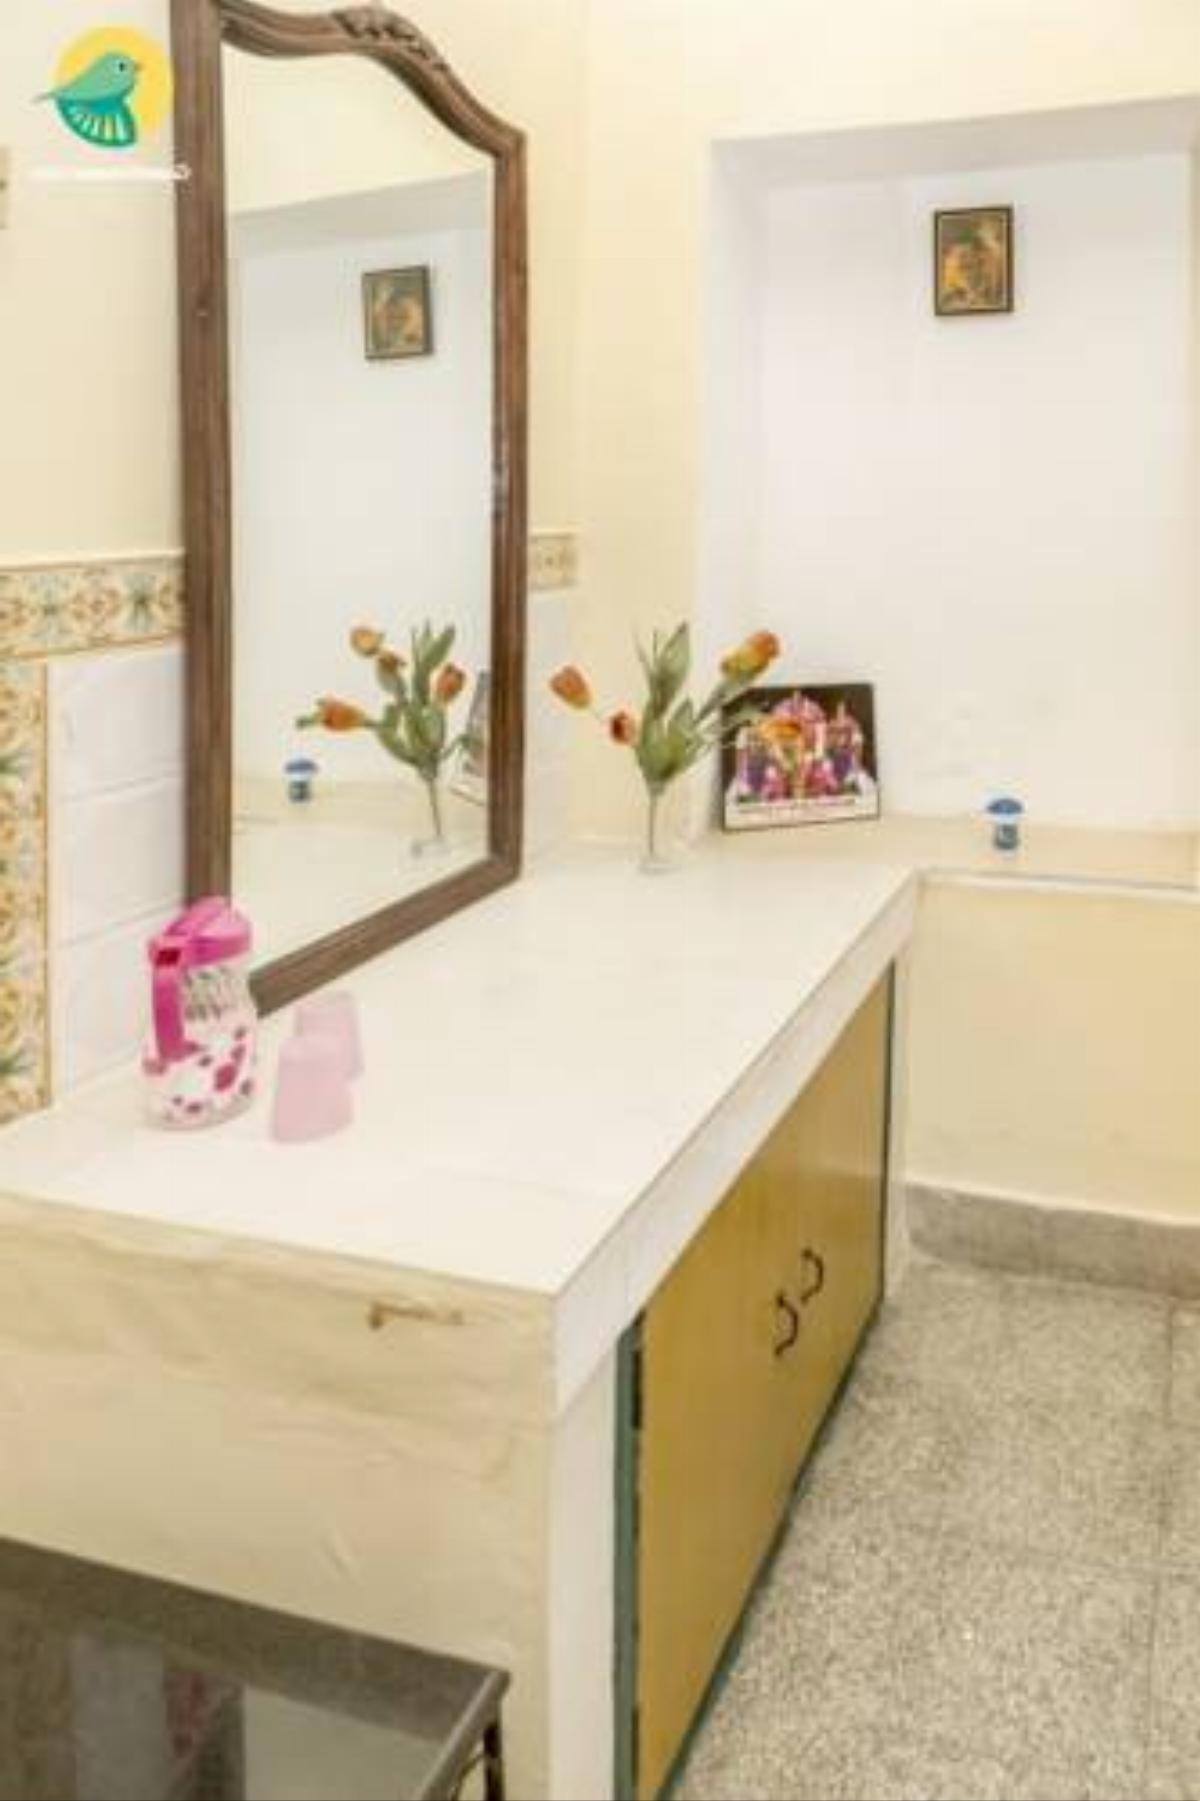 4 BHK Homestay in Chikkamagaluru, by GuestHouser (3DC4) Hotel Avathi India